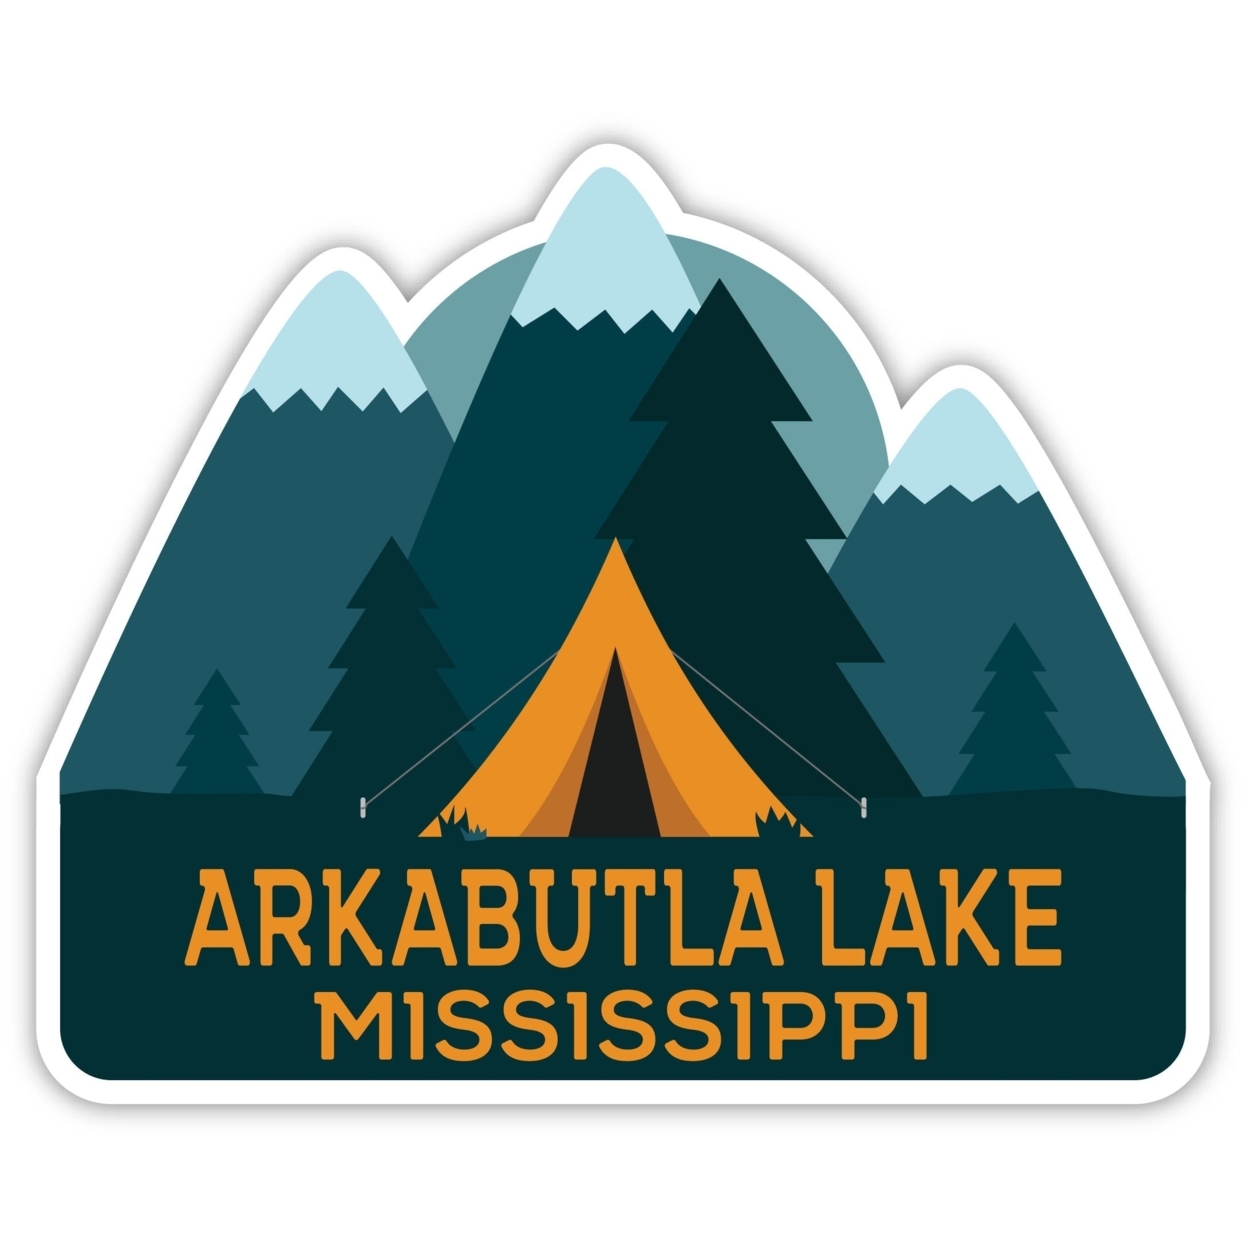 Arkabutla Lake Mississippi Souvenir Decorative Stickers (Choose Theme And Size) - 4-Pack, 10-Inch, Tent